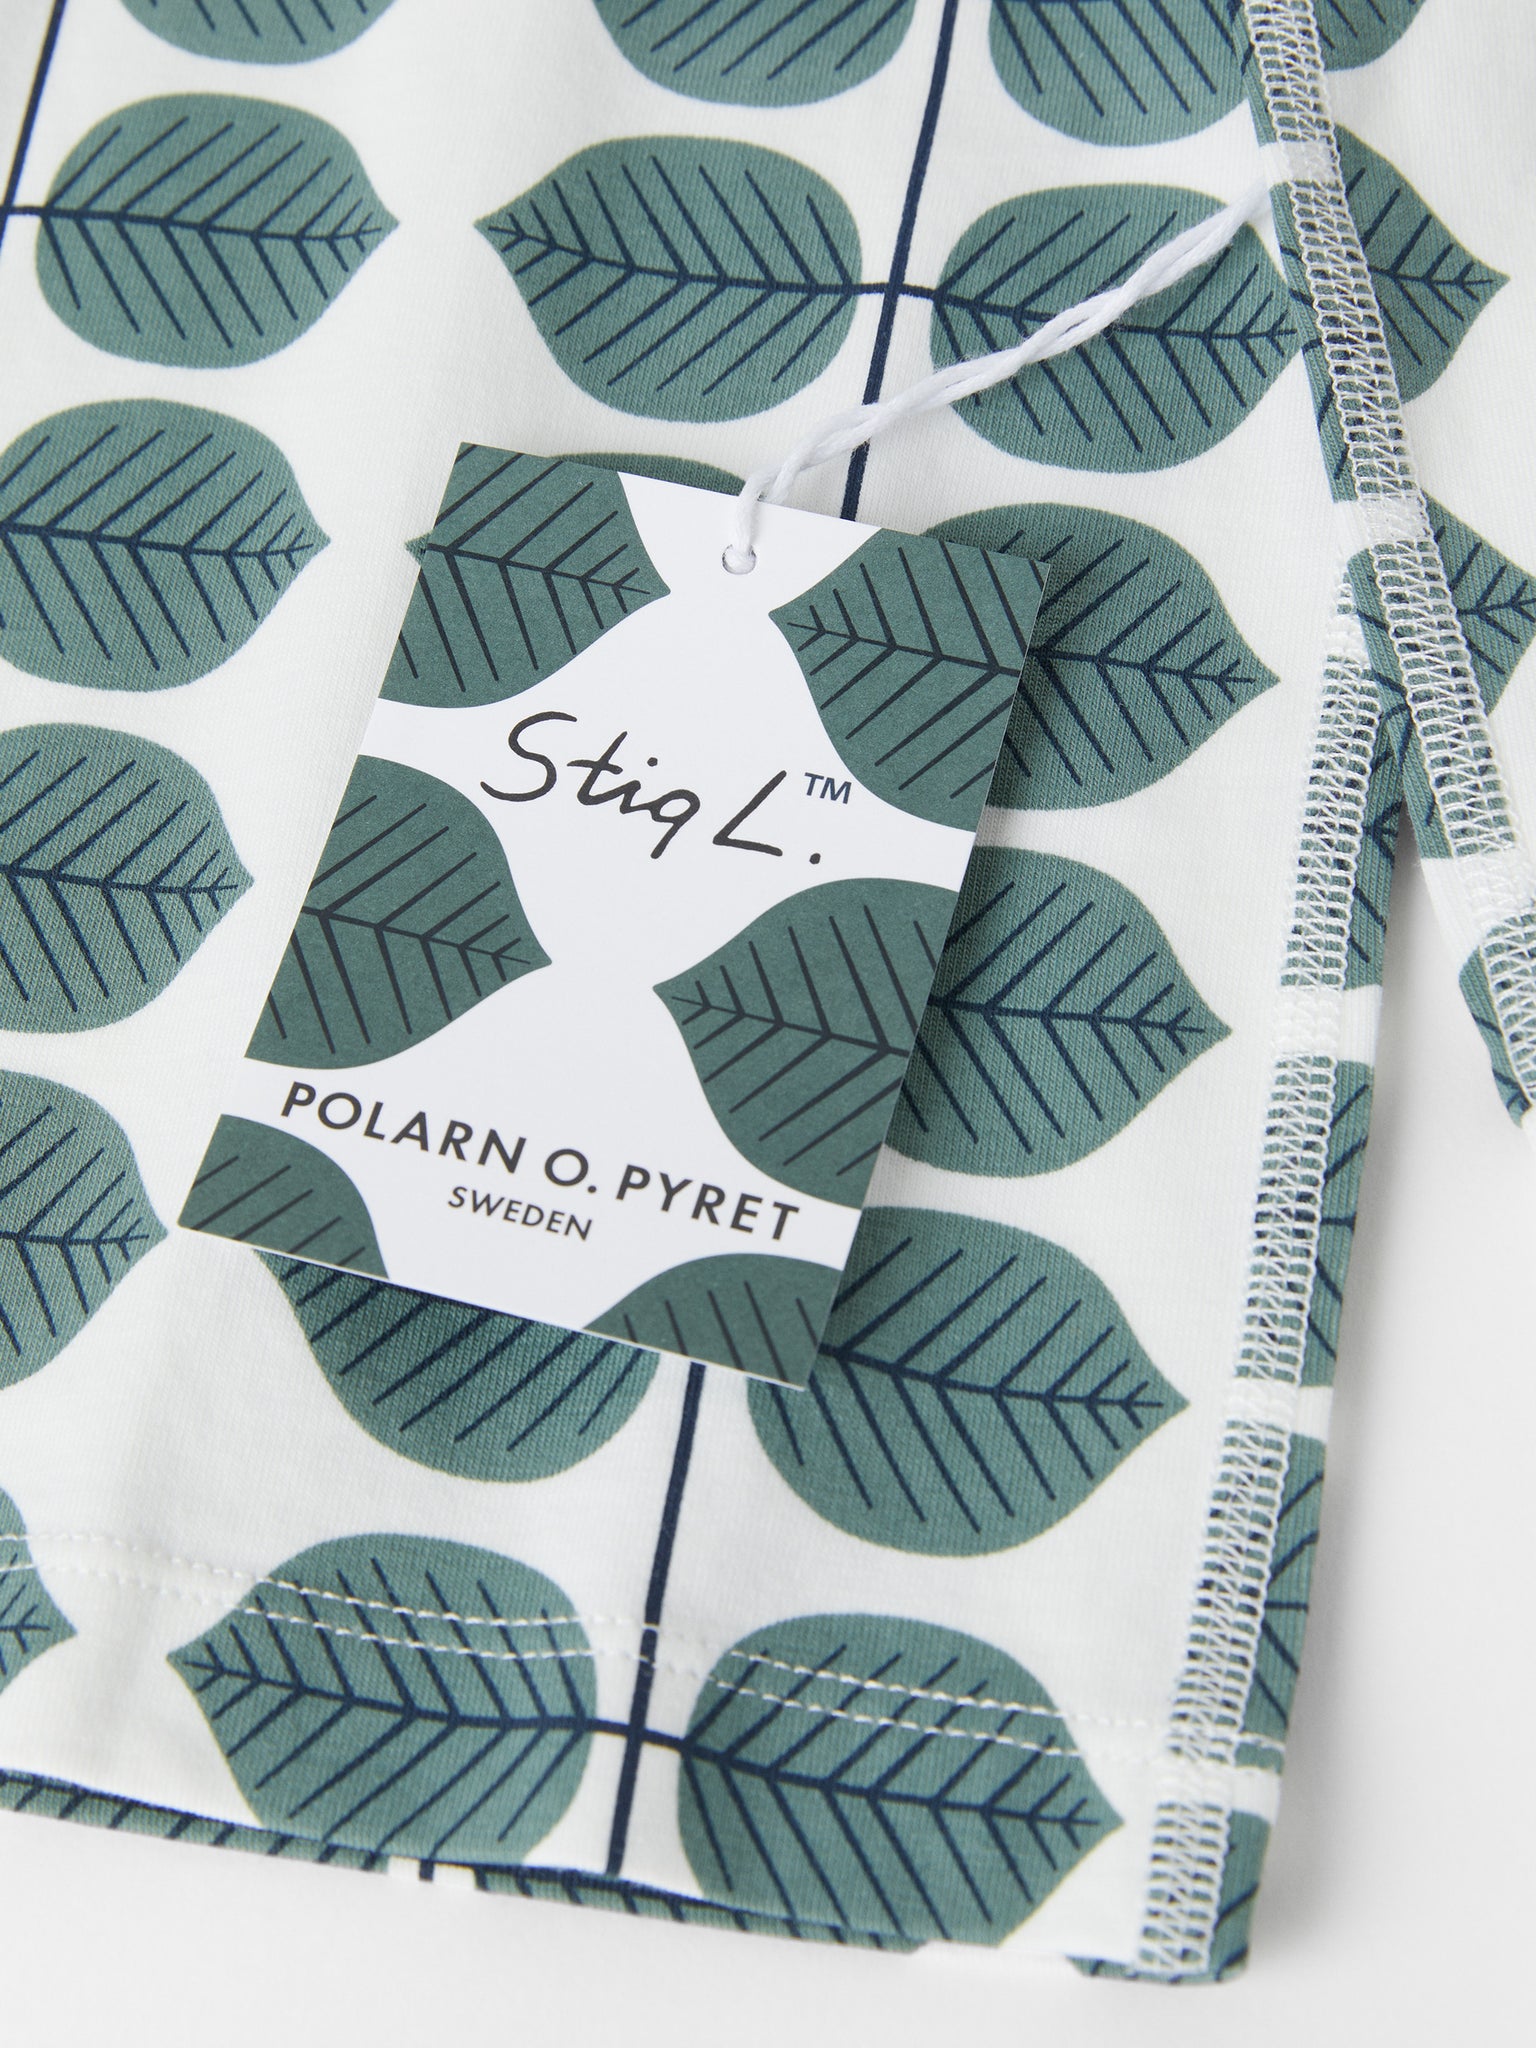 Organic Cotton Scandi Kids Pyjamas from the Polarn O. Pyret kidswear collection. Clothes made using sustainably sourced materials.